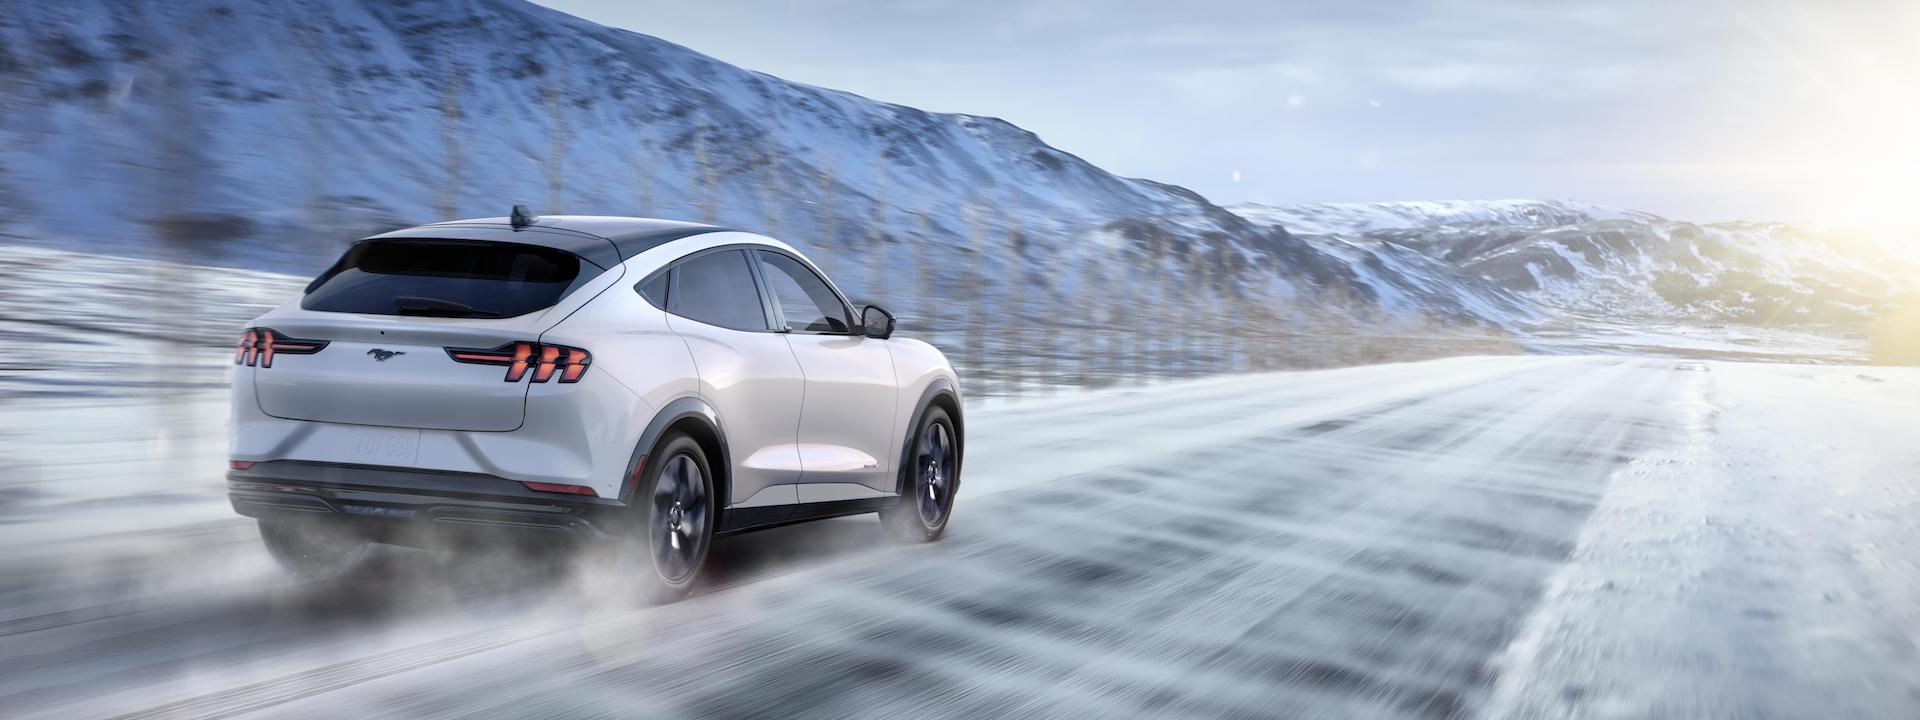 Are Electric Cars Good in Winter?